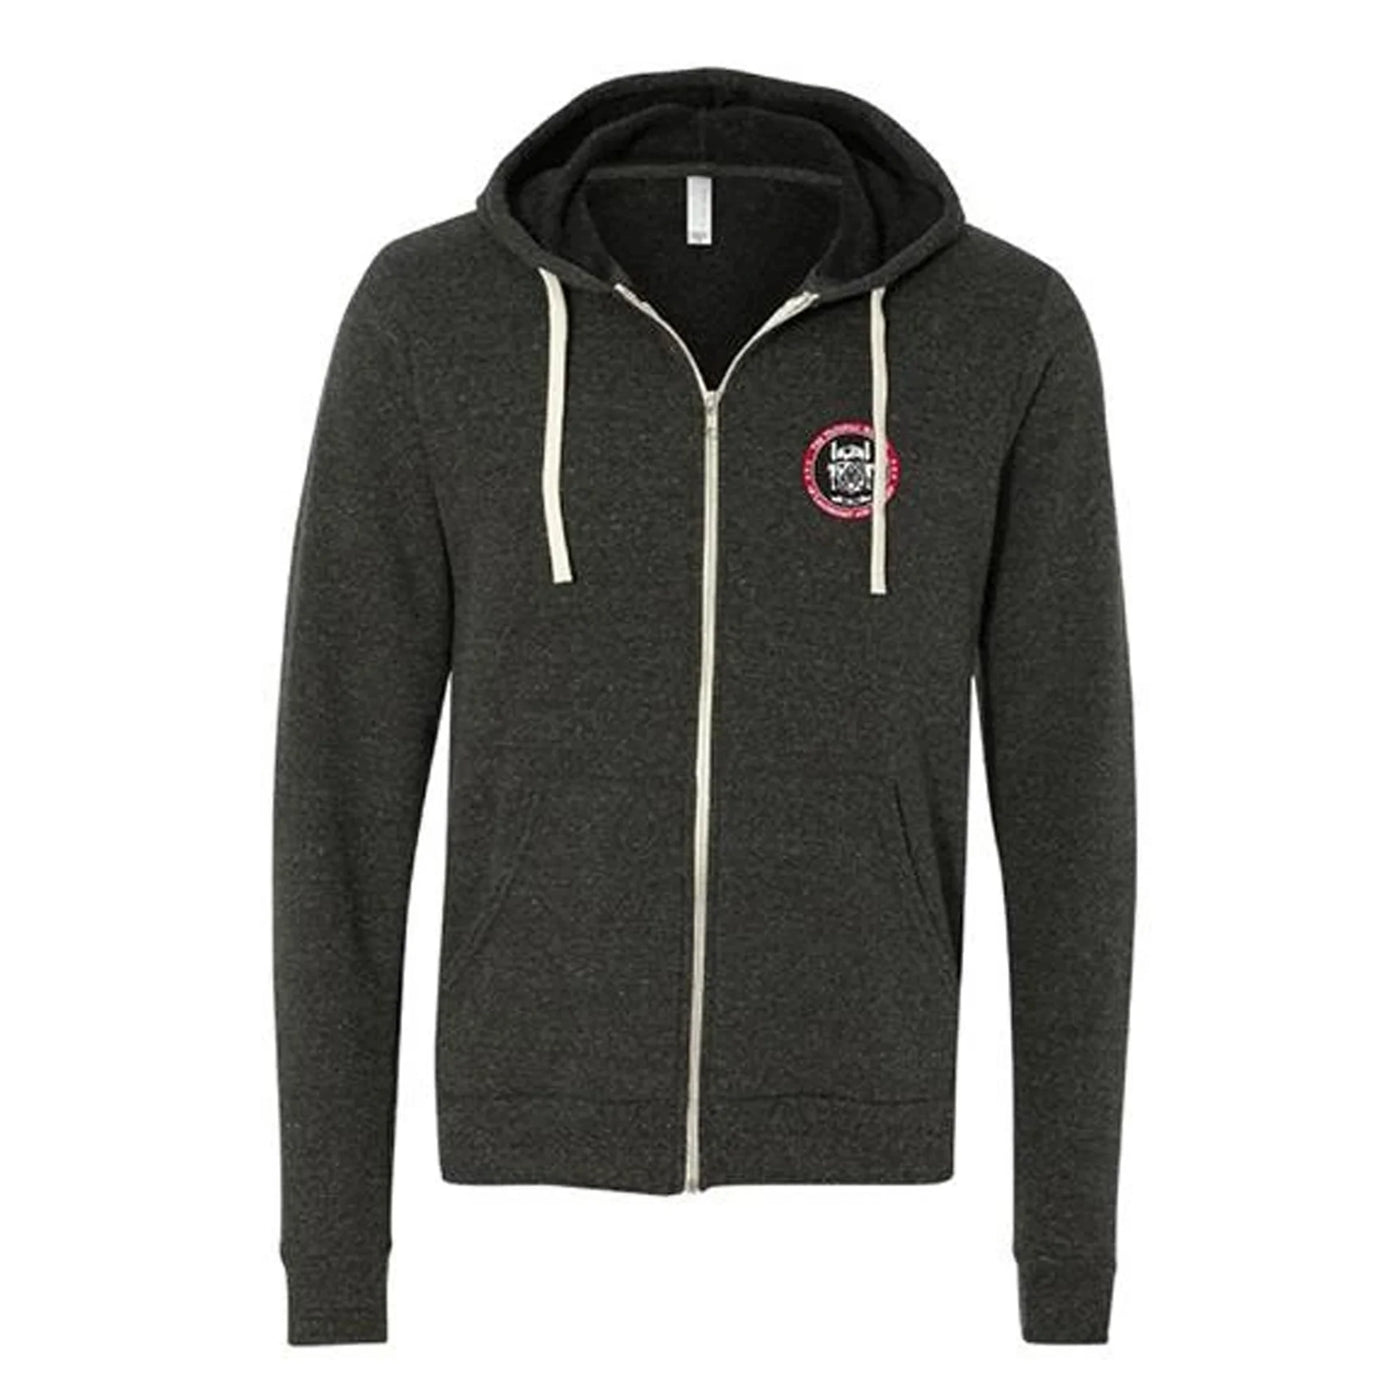 Full Zip Embroidered Hoodie - Charcoal